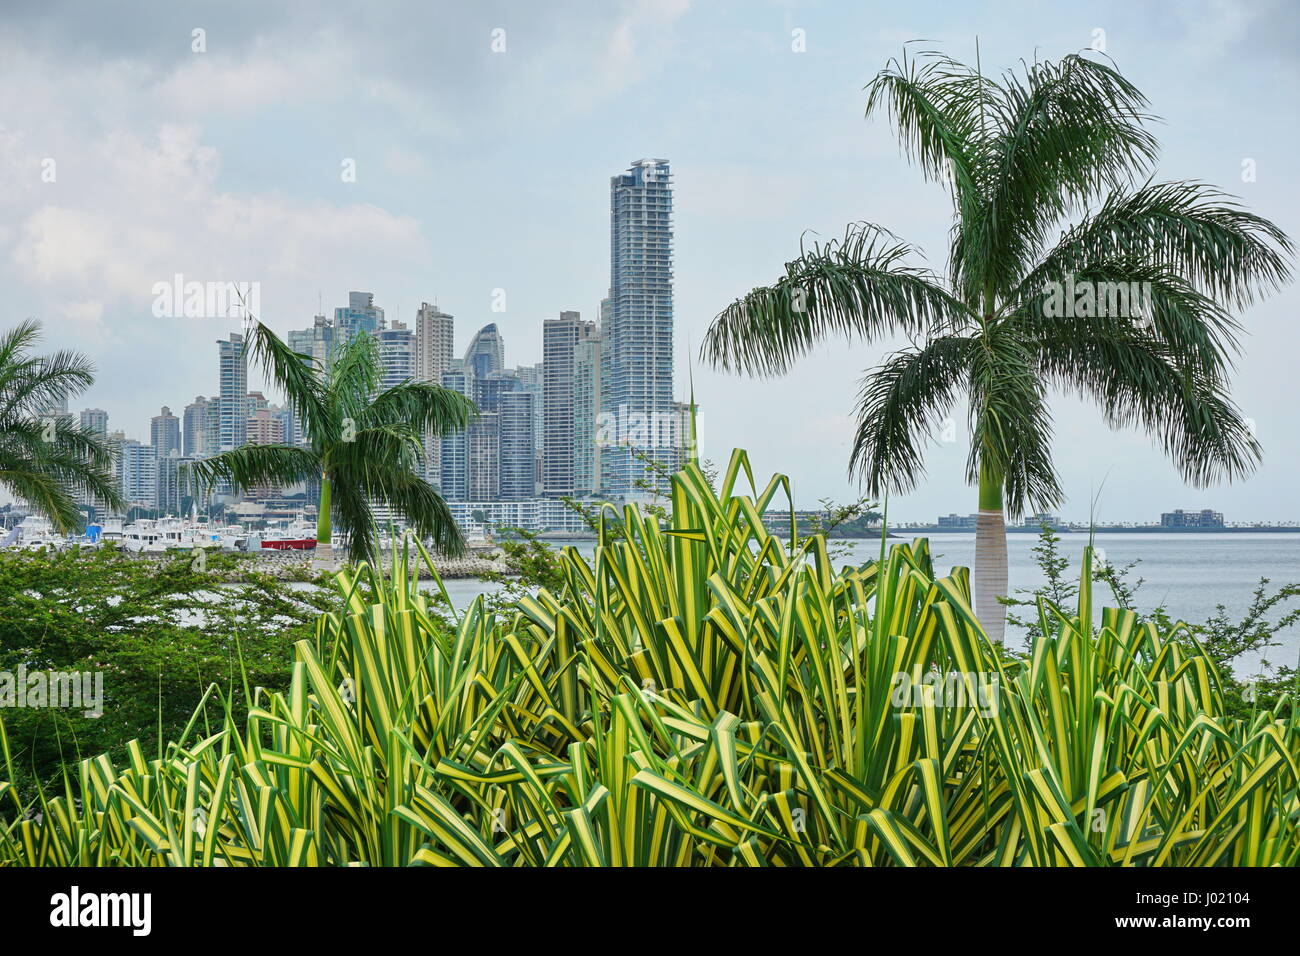 Skyscrapers with palm trees and pandanus plants in foreground, Panama City, Panama, Central America Stock Photo